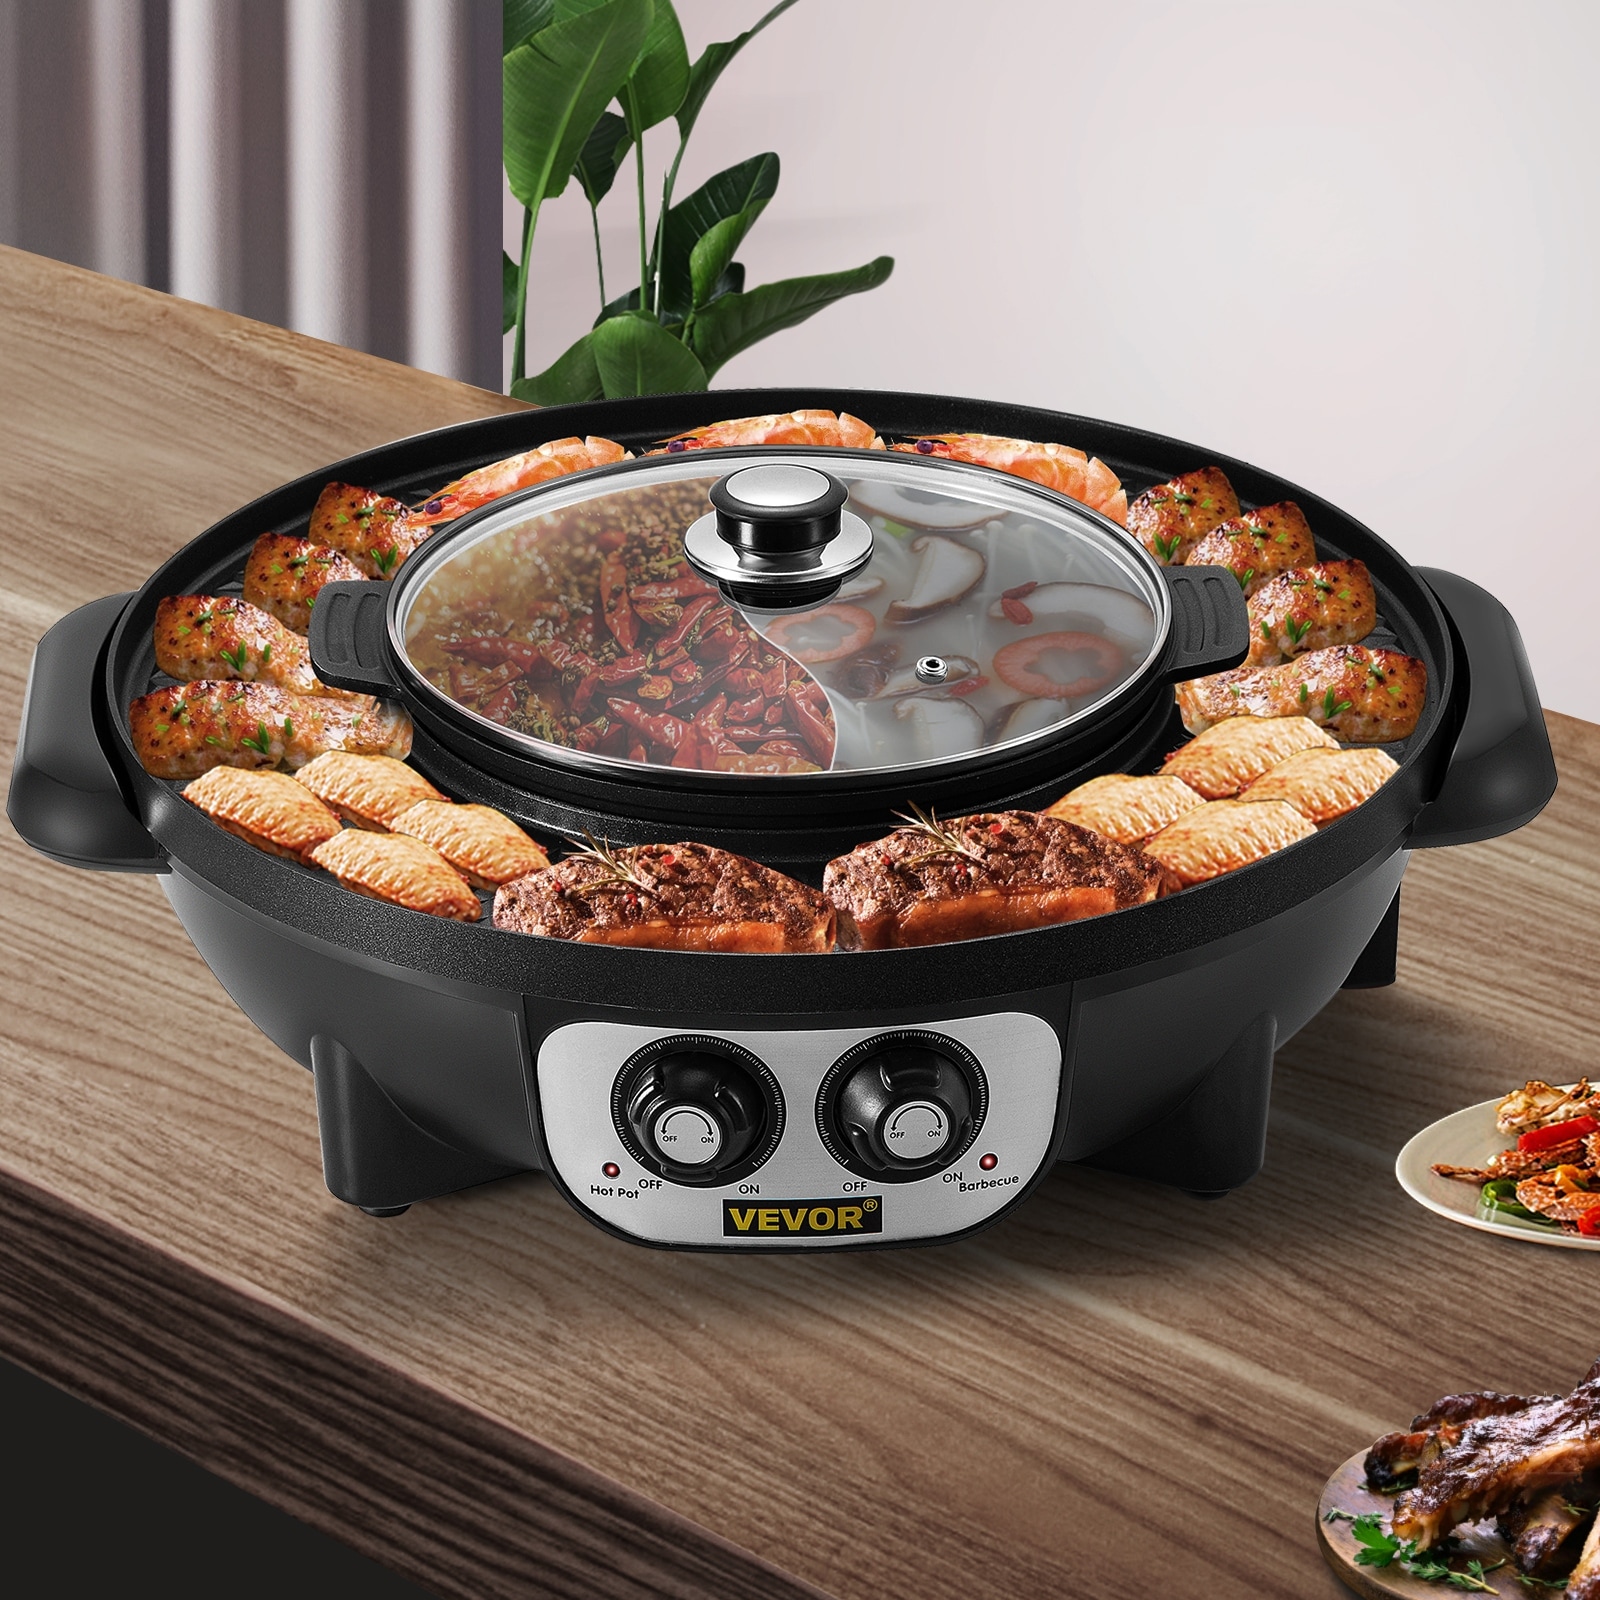 https://ak1.ostkcdn.com/images/products/is/images/direct/0ce3fd39561c9511fe4a6c53afdaa6c55a496800/VEVOR-2-in-1-Electric-Grill-and-Hot-Pot-2200W-BBQ-Pan-Grill-and-Hot-Pot-Multifunctional-Teppanyaki-Grill-Pot-with-Dual-Temp-Ctrl.jpg